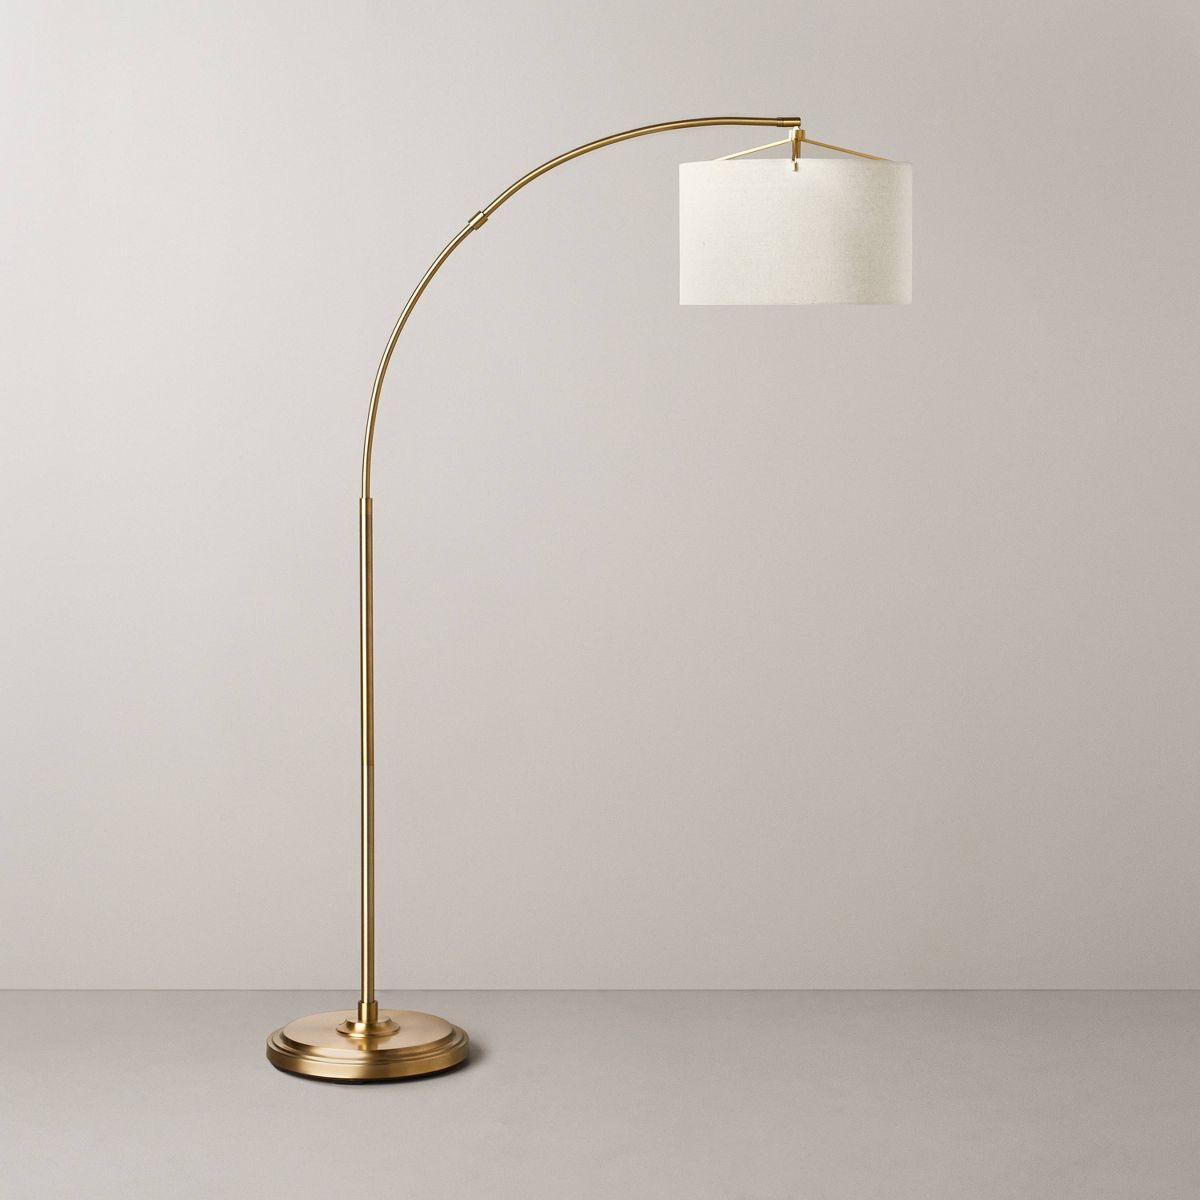 Arched Brass Floor Lamp with Textured Drum Shade - Hearth & Hand™ with Magnolia | Target